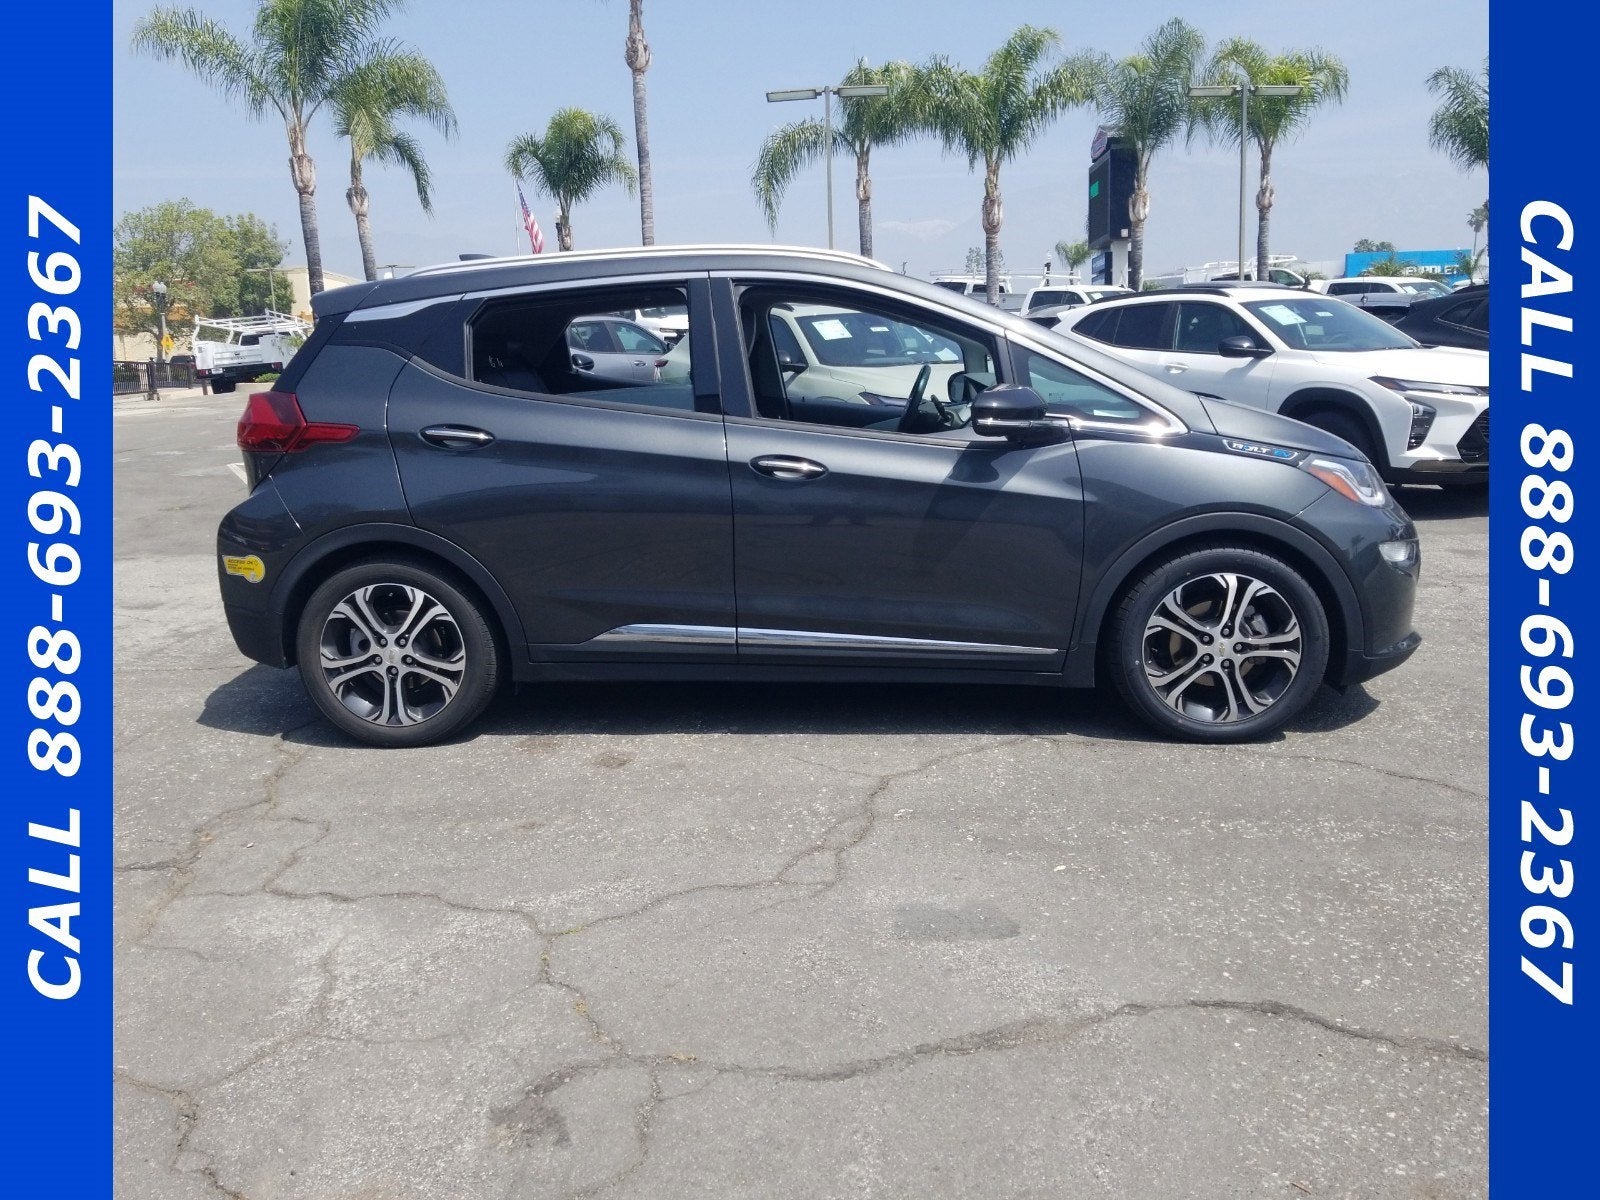 Used 2021 Chevrolet Bolt EV Premier with VIN 1G1FZ6S06M4100692 for sale in Upland, CA